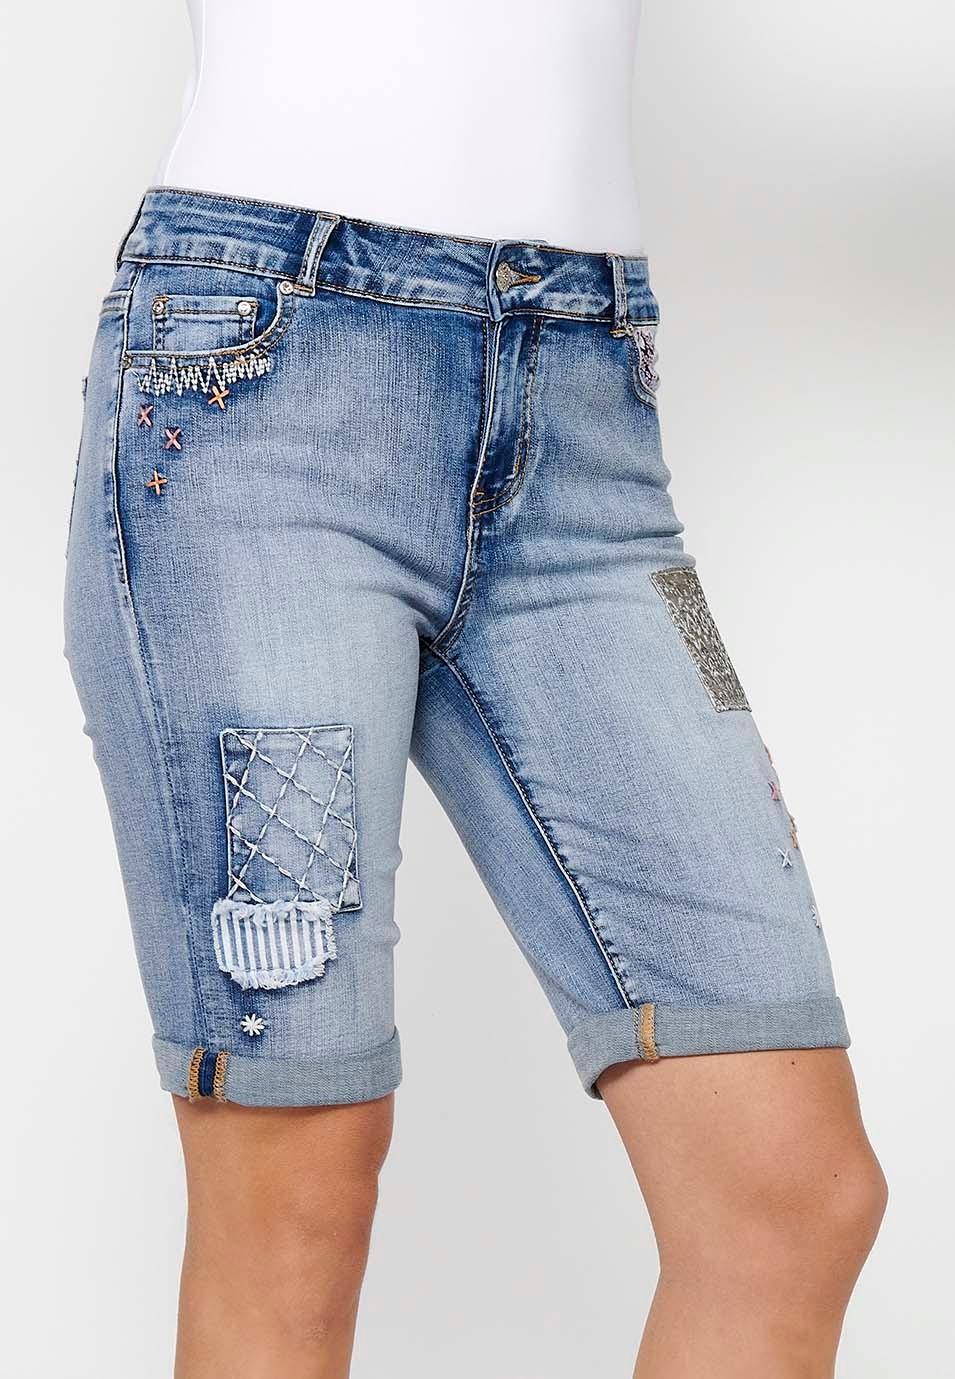 Short shorts finished in turn with details of front patches and removable chain decoration with front closure with zipper and button in Blue for Women 2